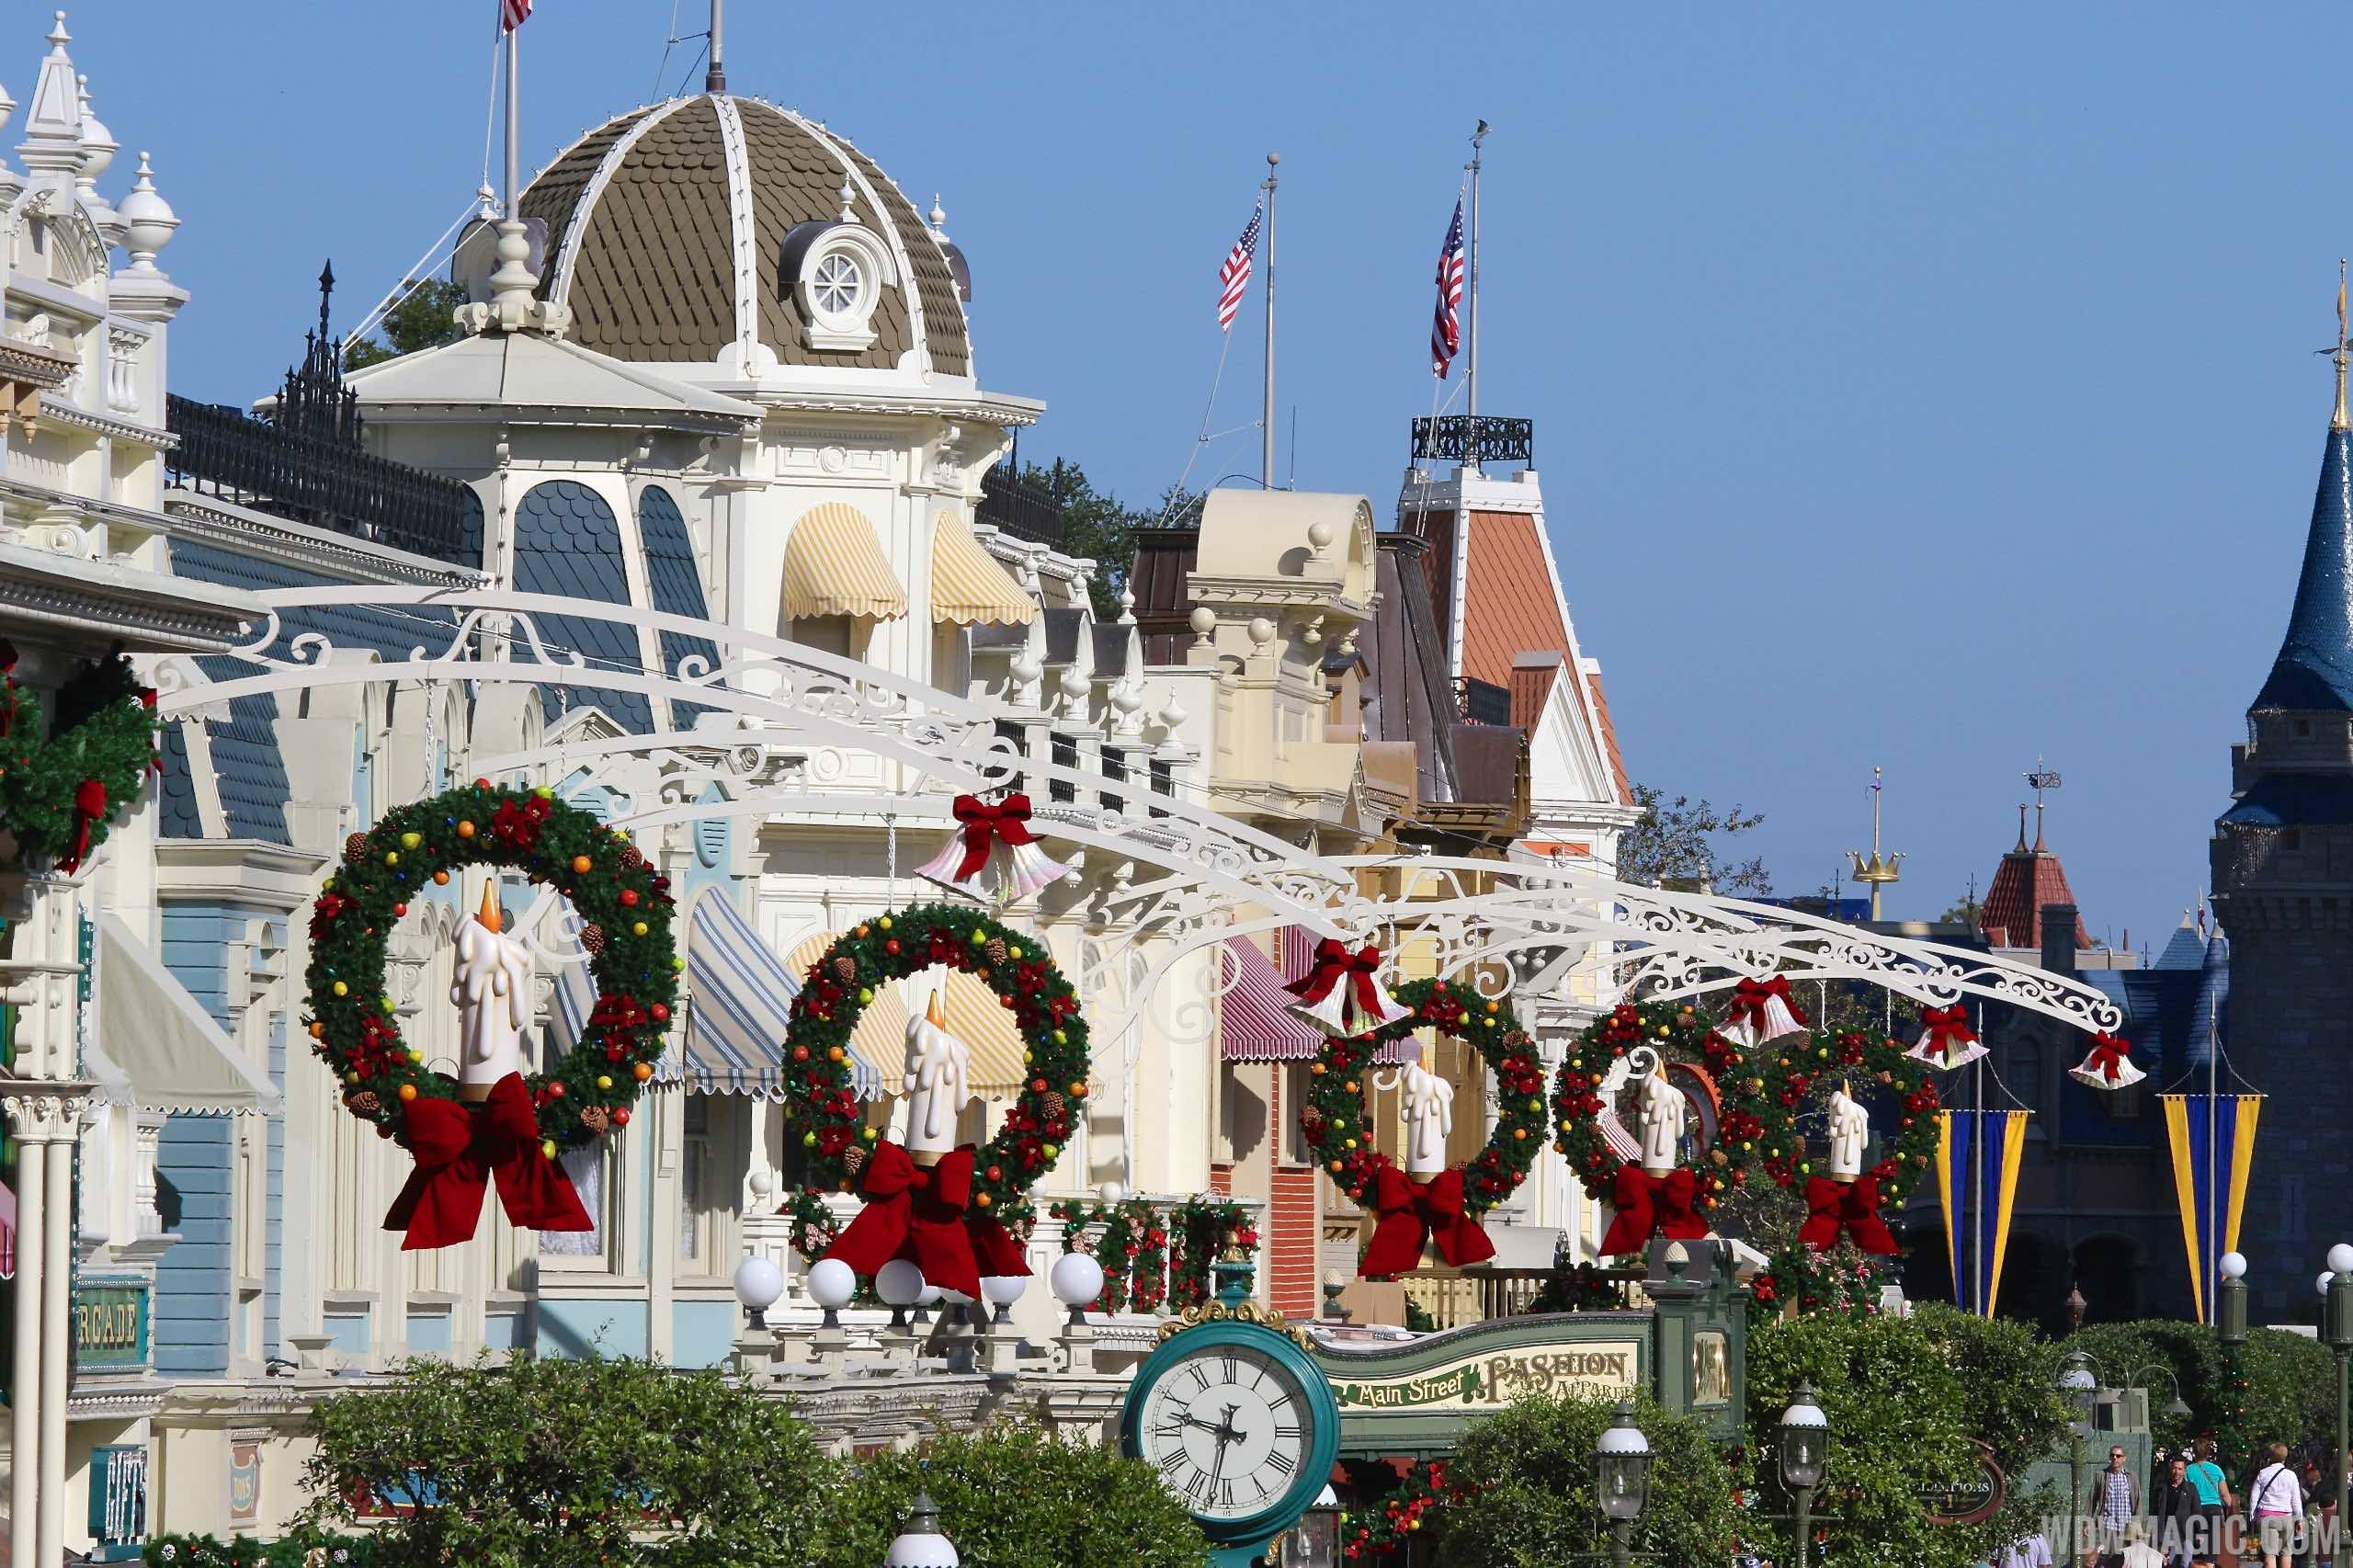 PHOTOS - First look at the new Main Street U.S.A. holiday wreaths